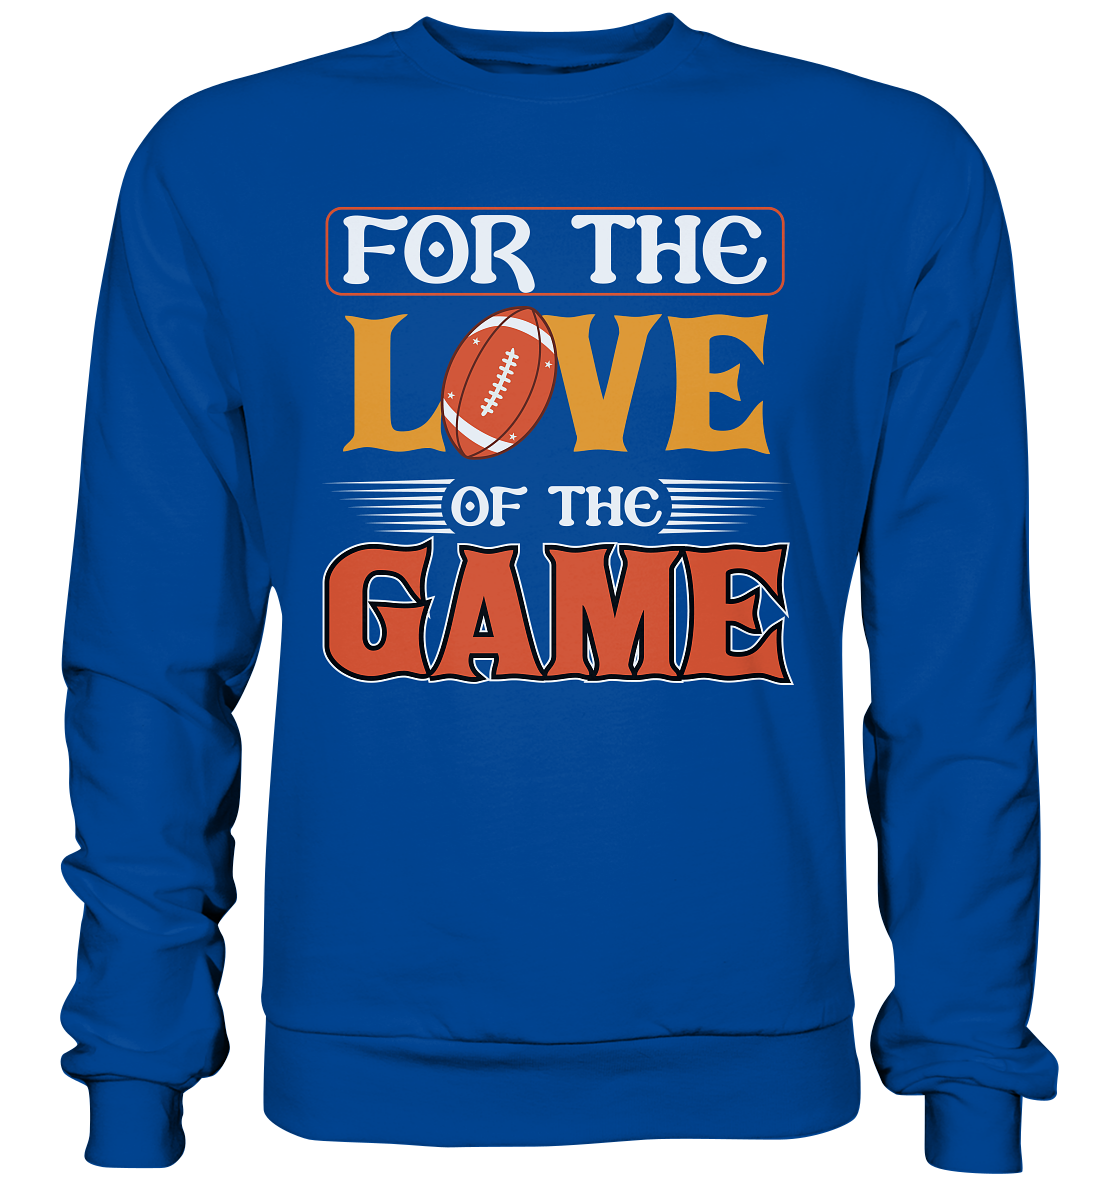 For the Love of the Game - Basic Sweatshirt - Football Unity Football Unity